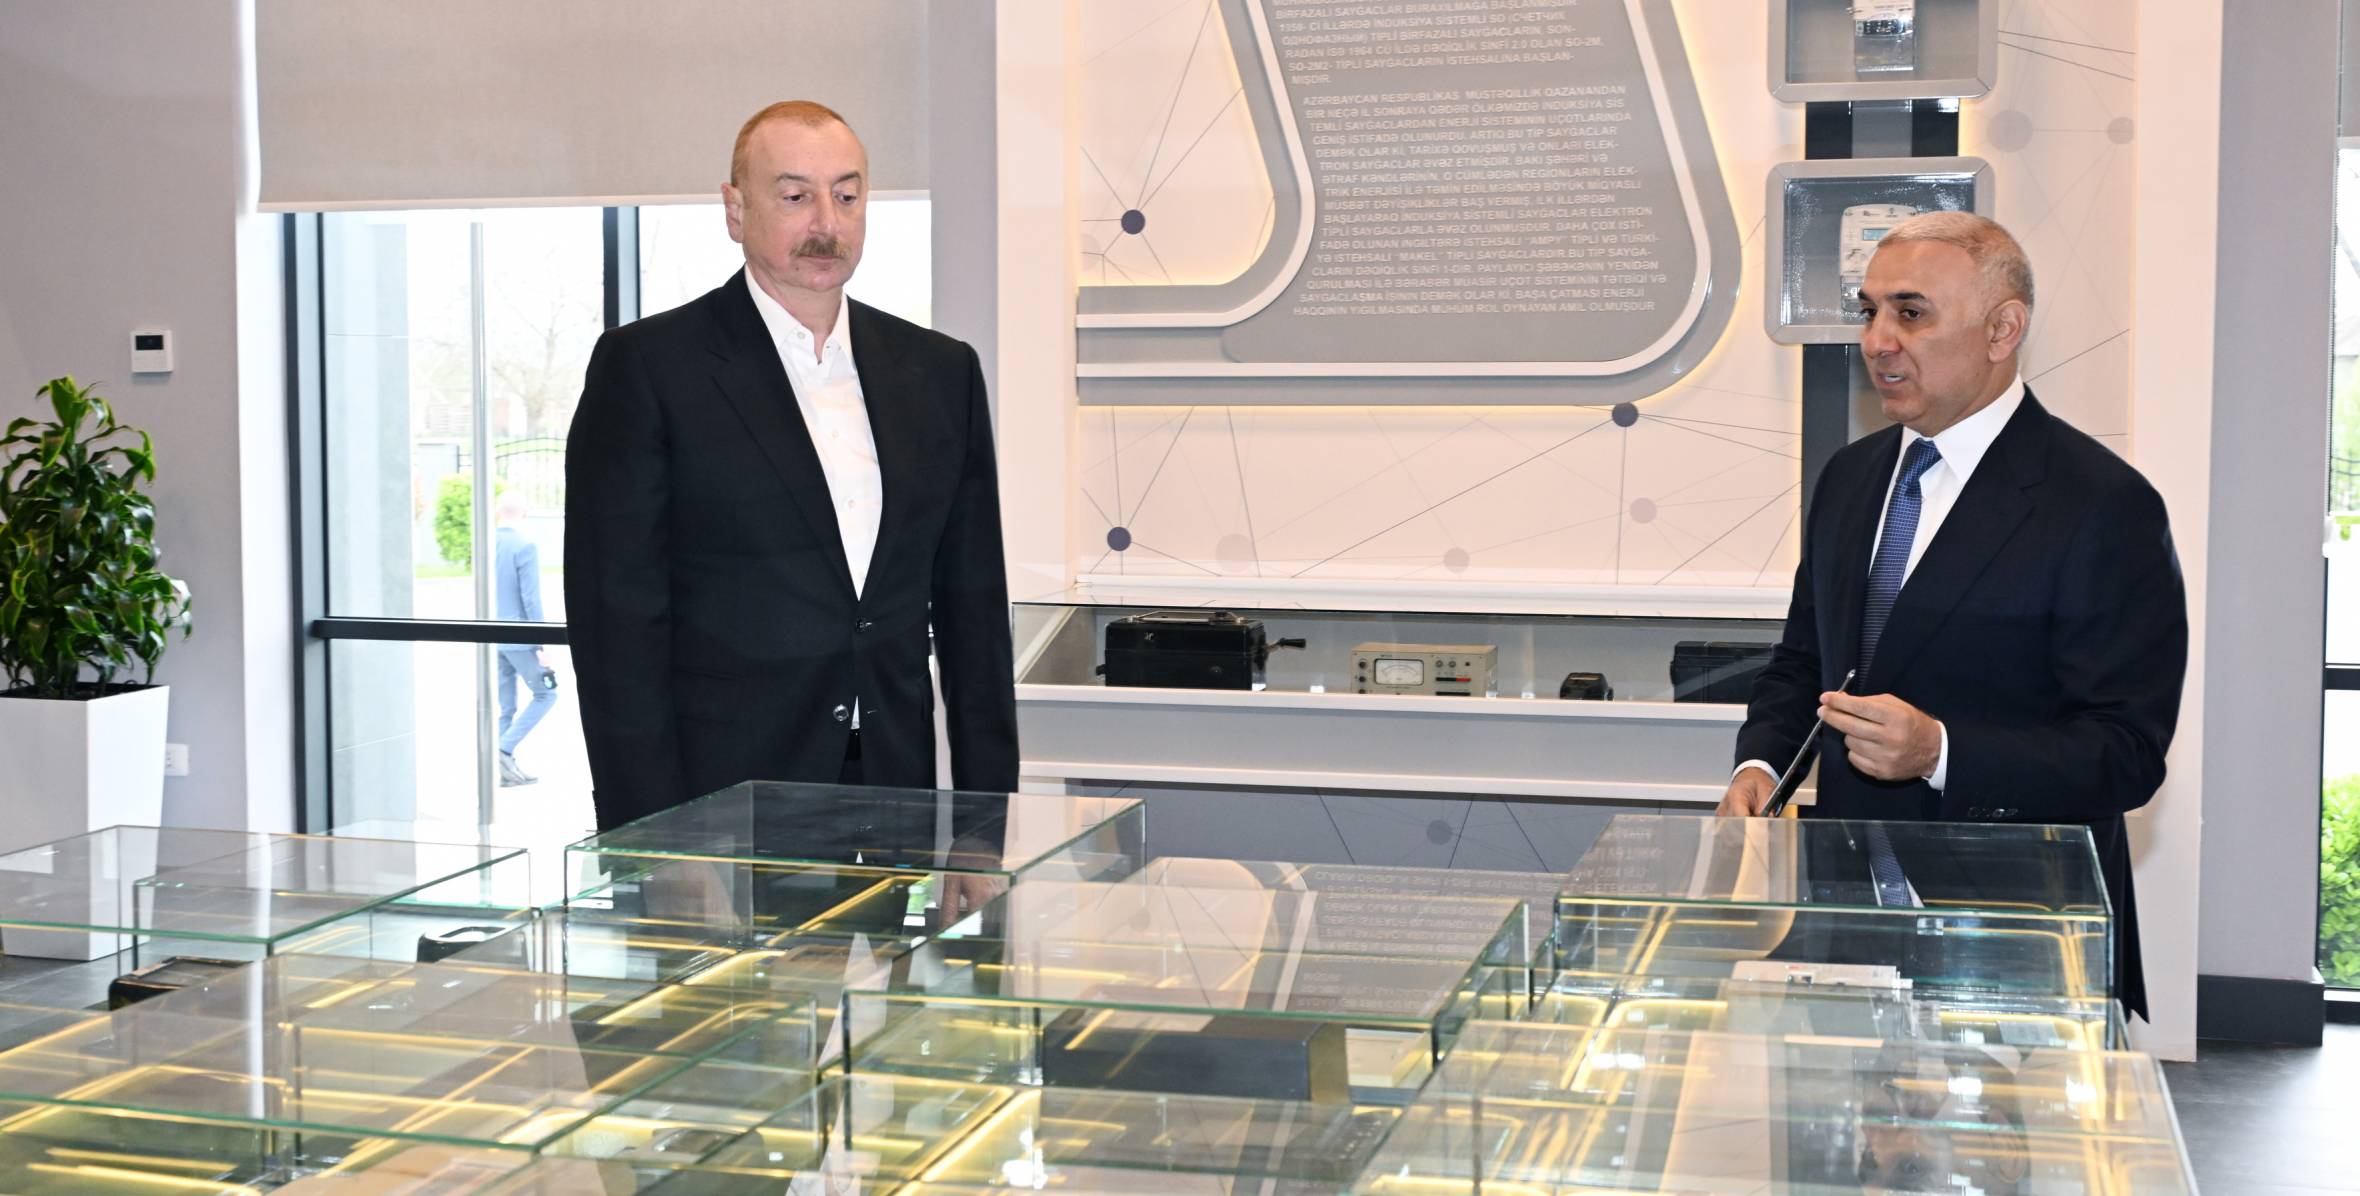 Ilham Aliyev has participated in the opening ceremonies of the 110/35/10 kV "Hajialili" power substation and the Regional Training Center owned by Azerishig OJSC